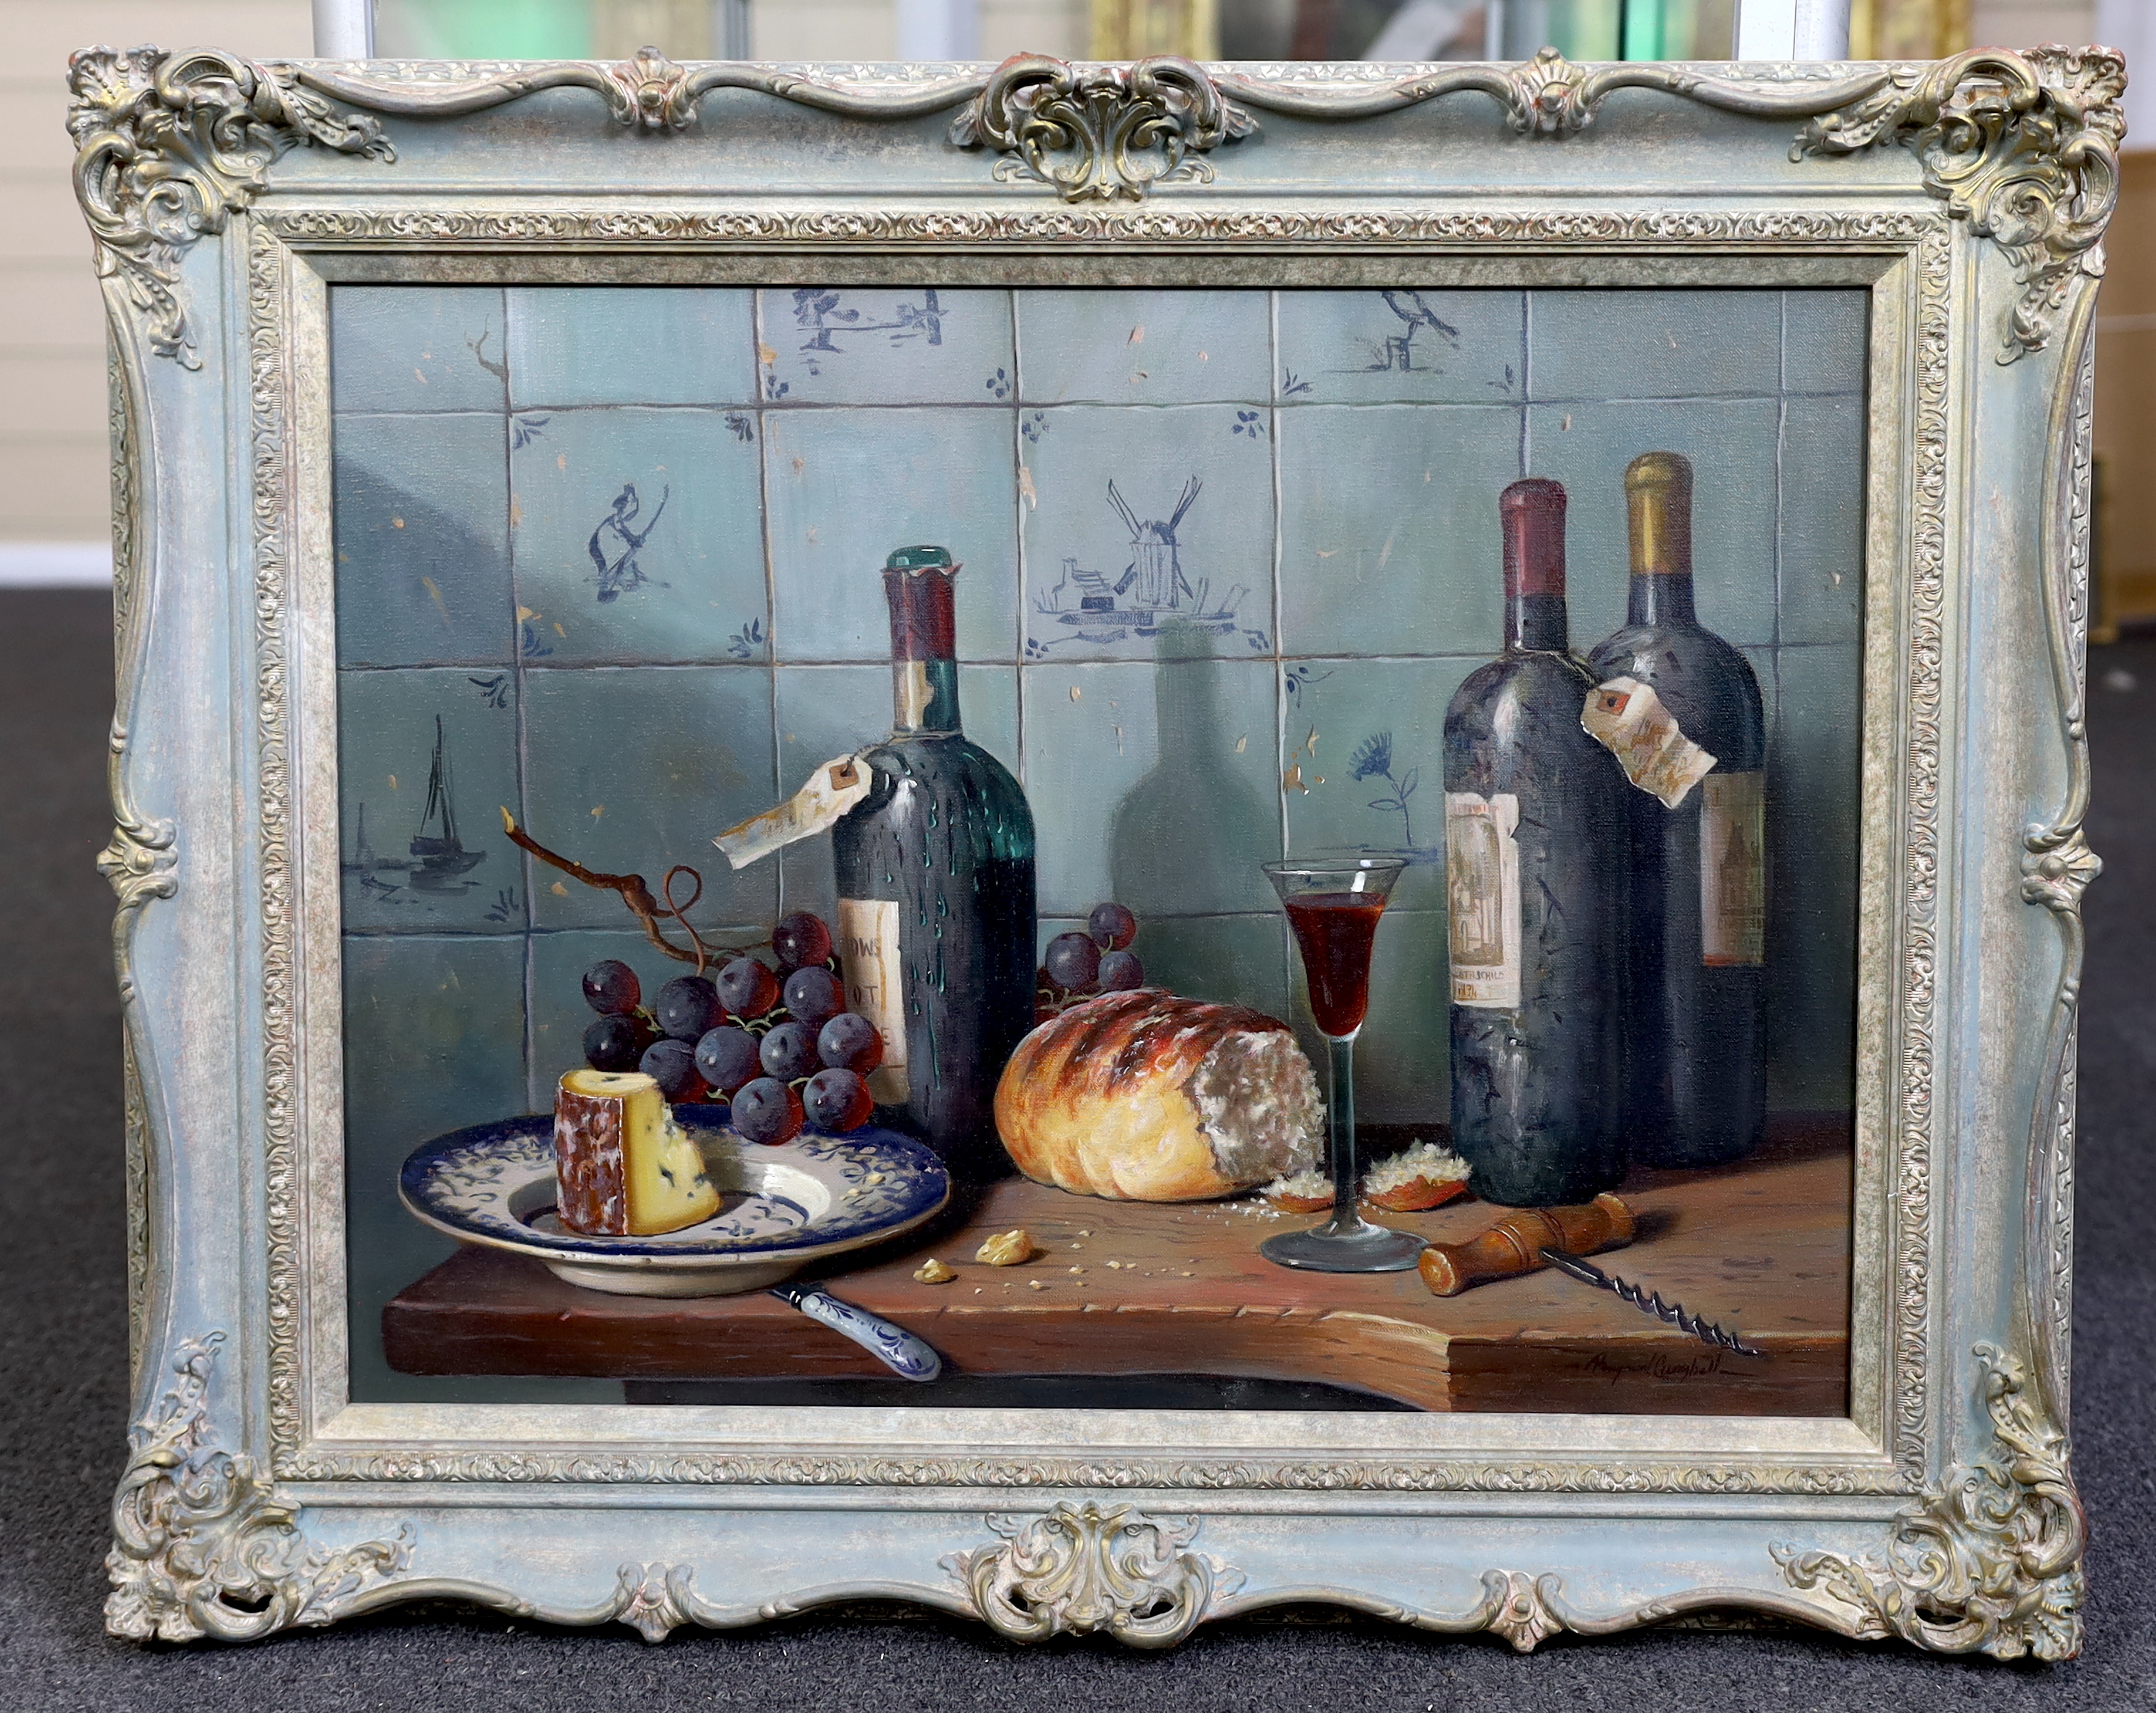 Raymond Campbell (English, b.1956), Still life of claret, cheese and grapes upon a ledge with delft tiles beyond, oil on canvas, 45 x 60cm